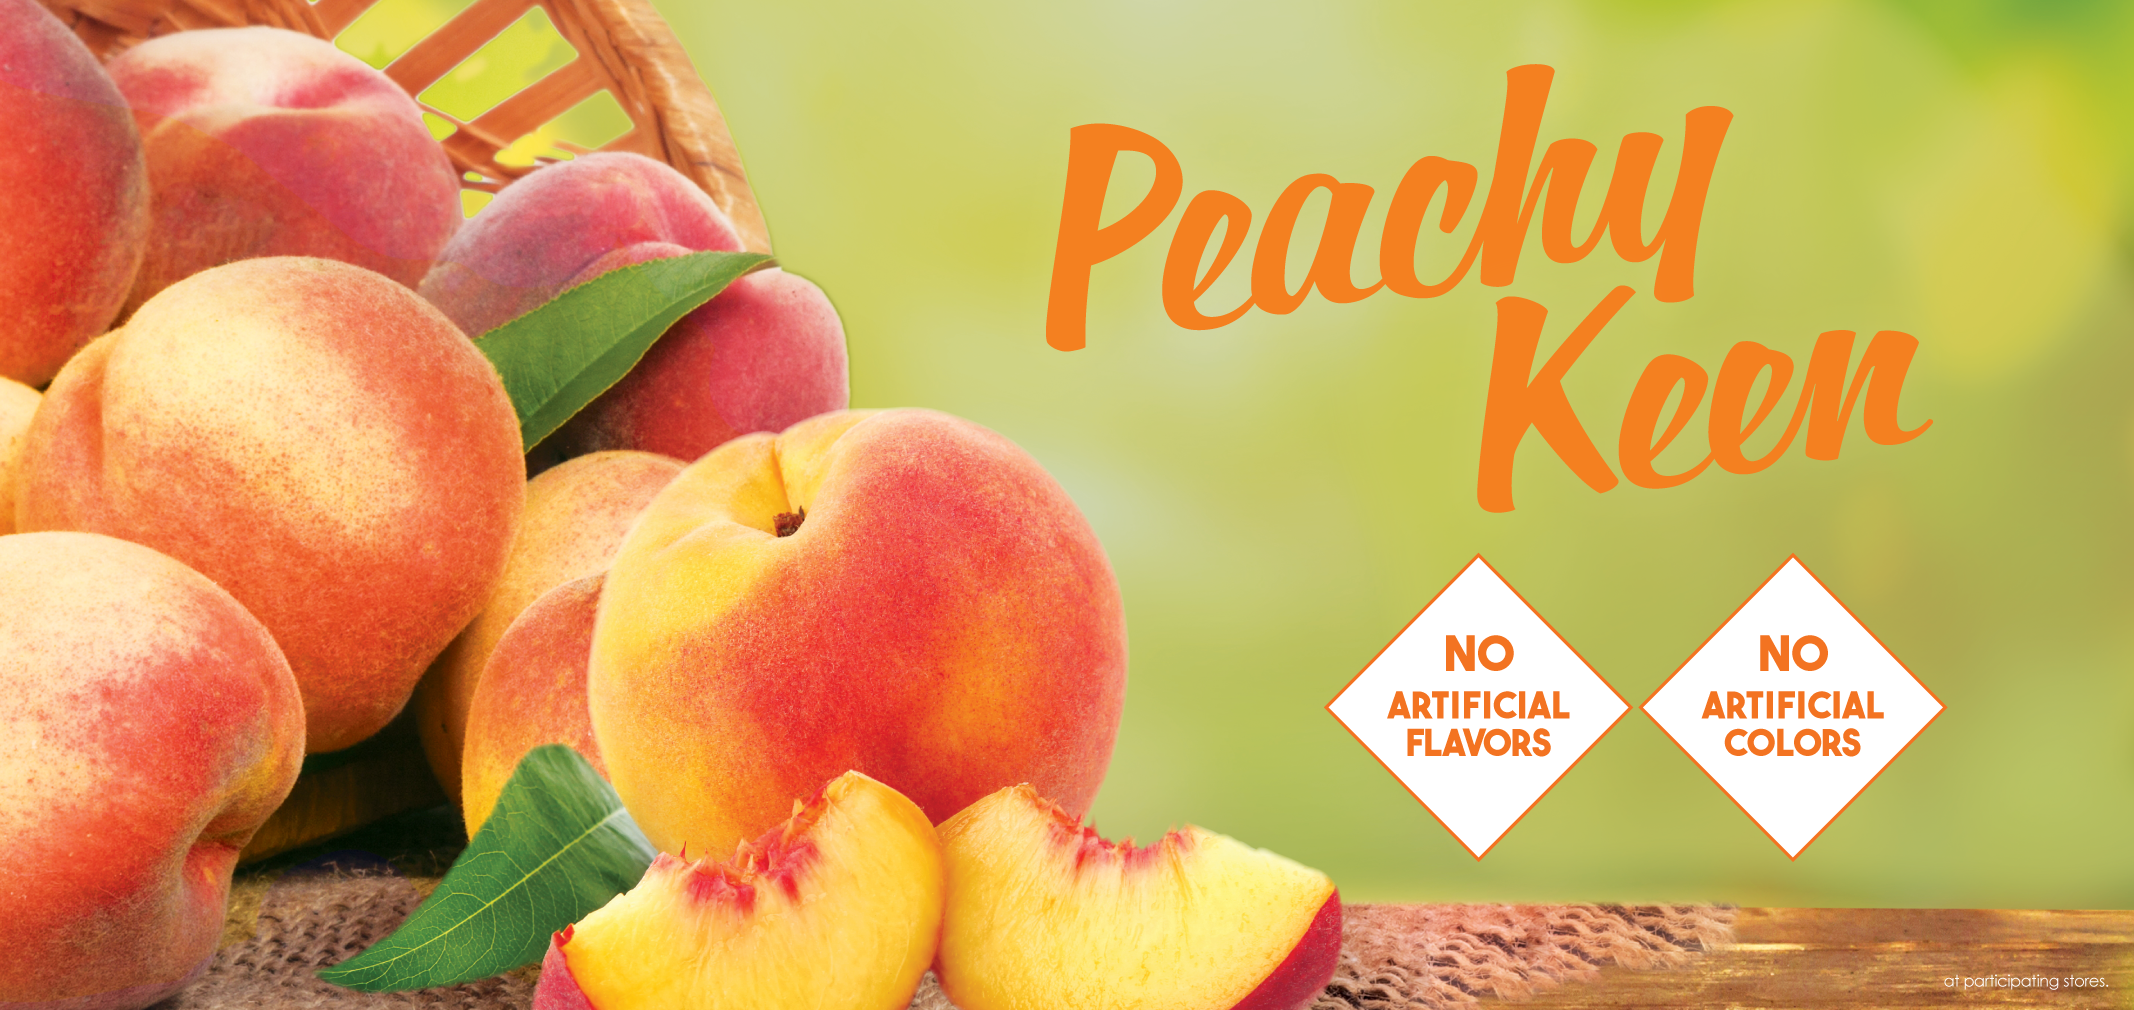 Peachy Keen label image